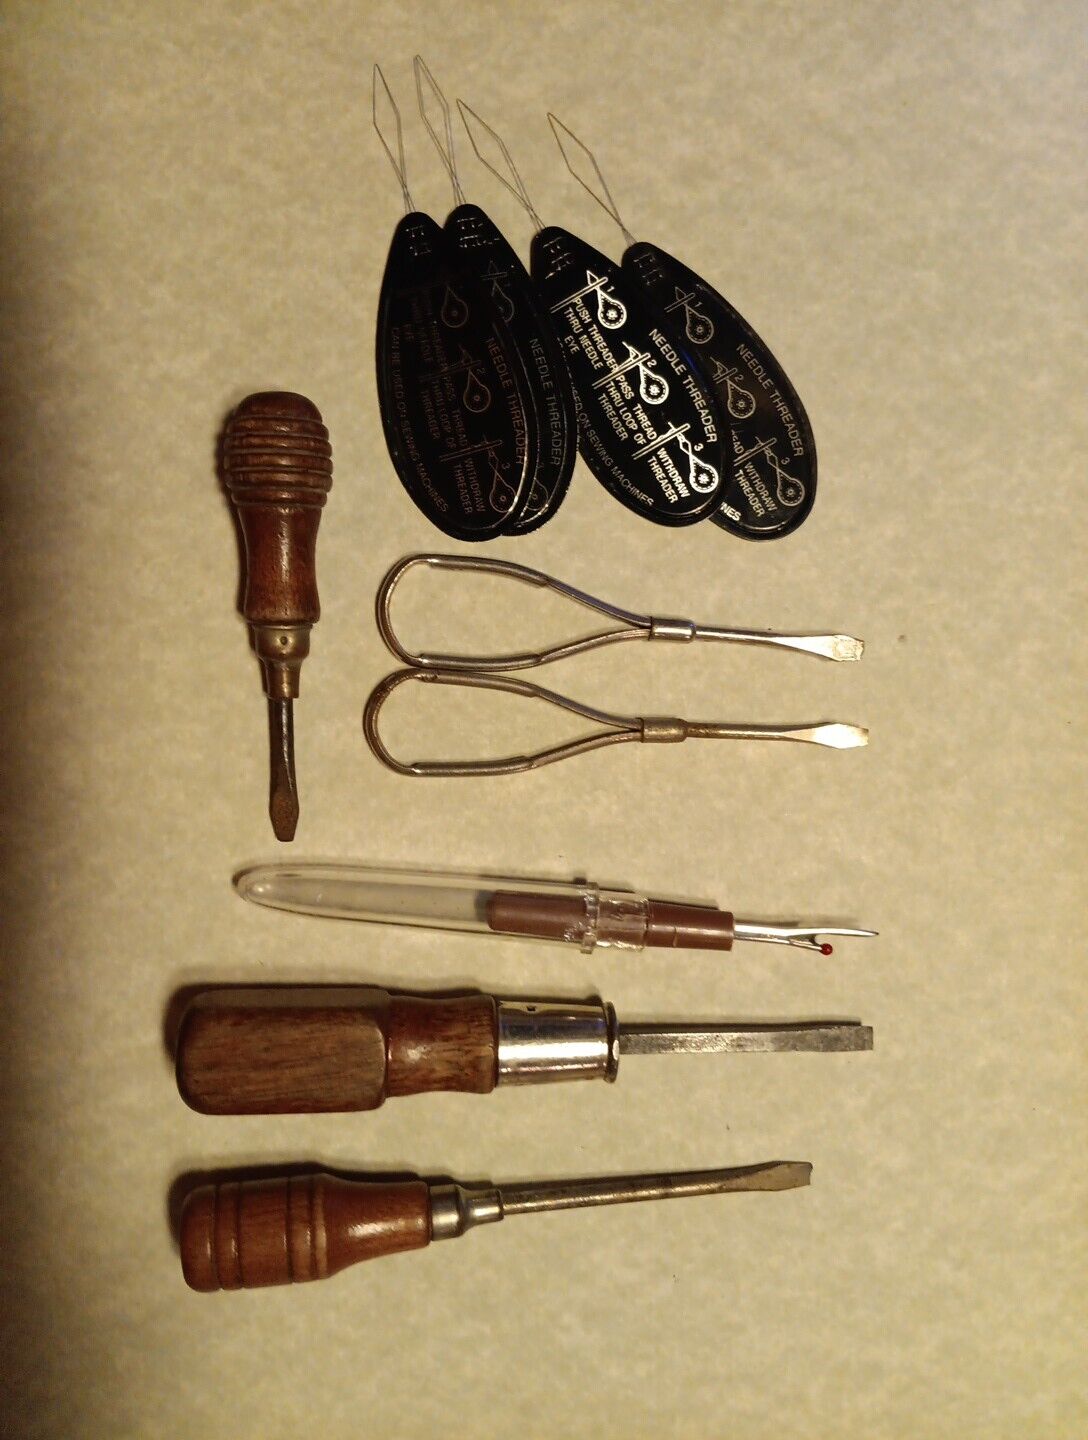 Vintage Sewing Machine Screwdrivers, Threaders, Stitch Remover, Some Singer